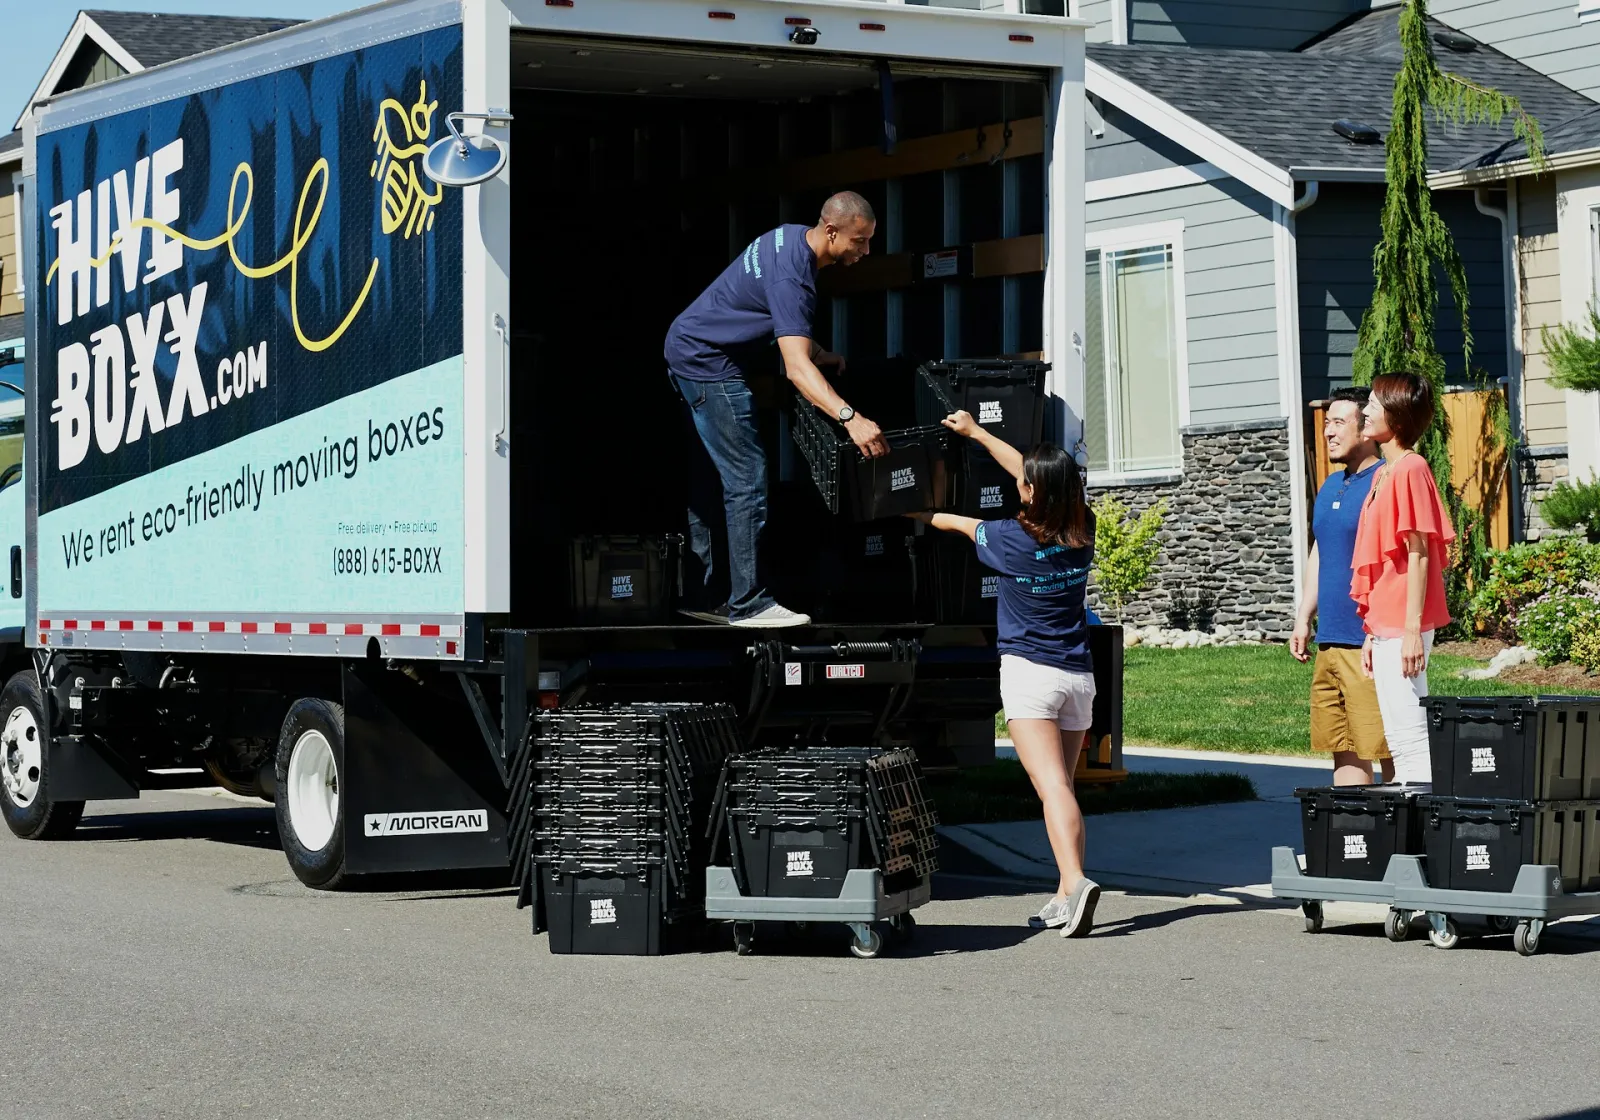 Target New Movers With These Marketing Strategies